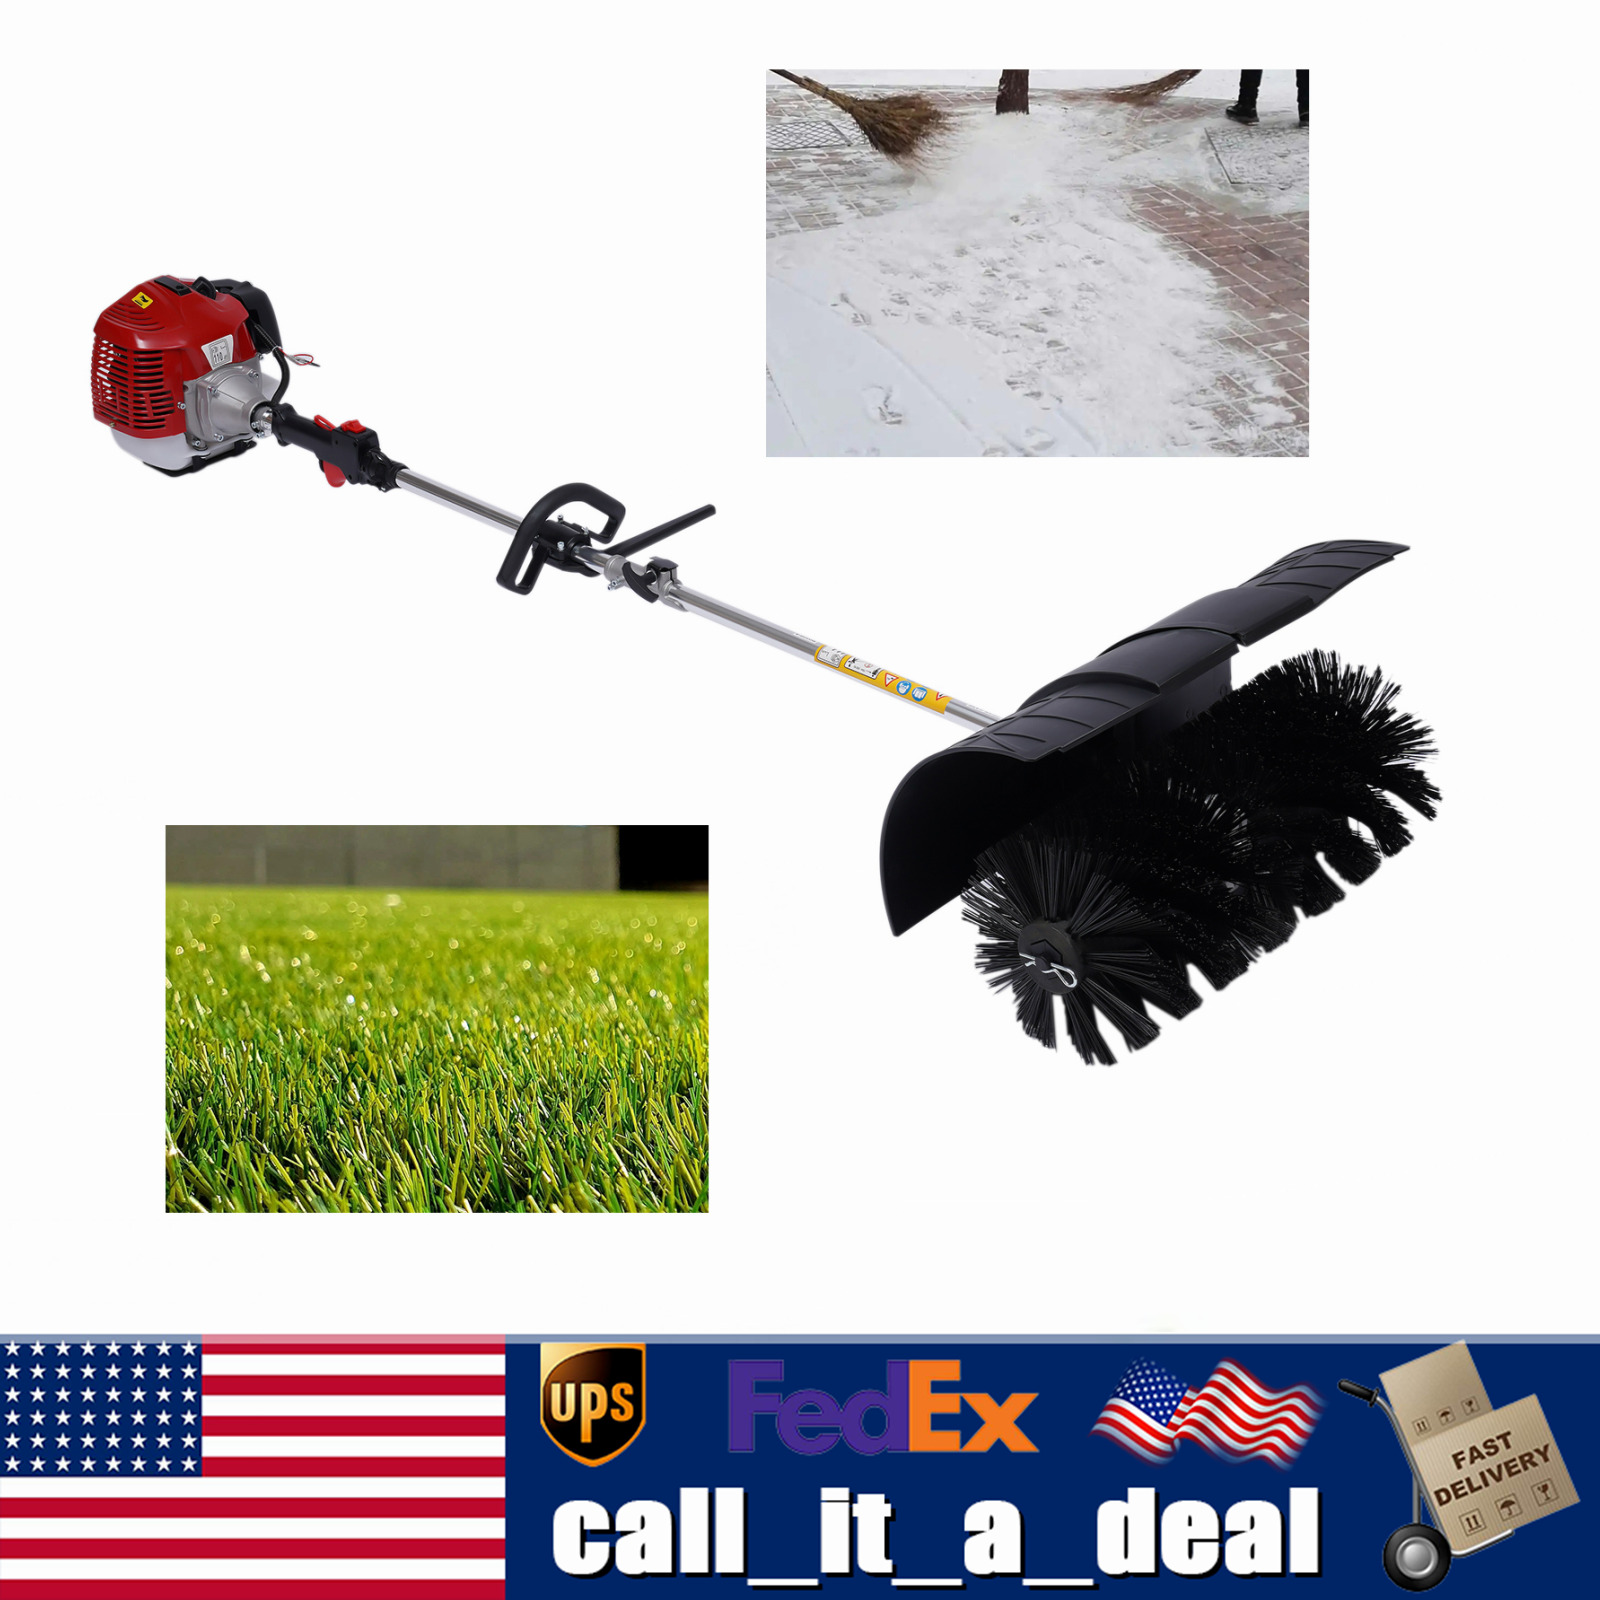 Handheld 52cc Gas Sweeper Broom W/ Blower Driveway Turf For Grass Snow Cleaning